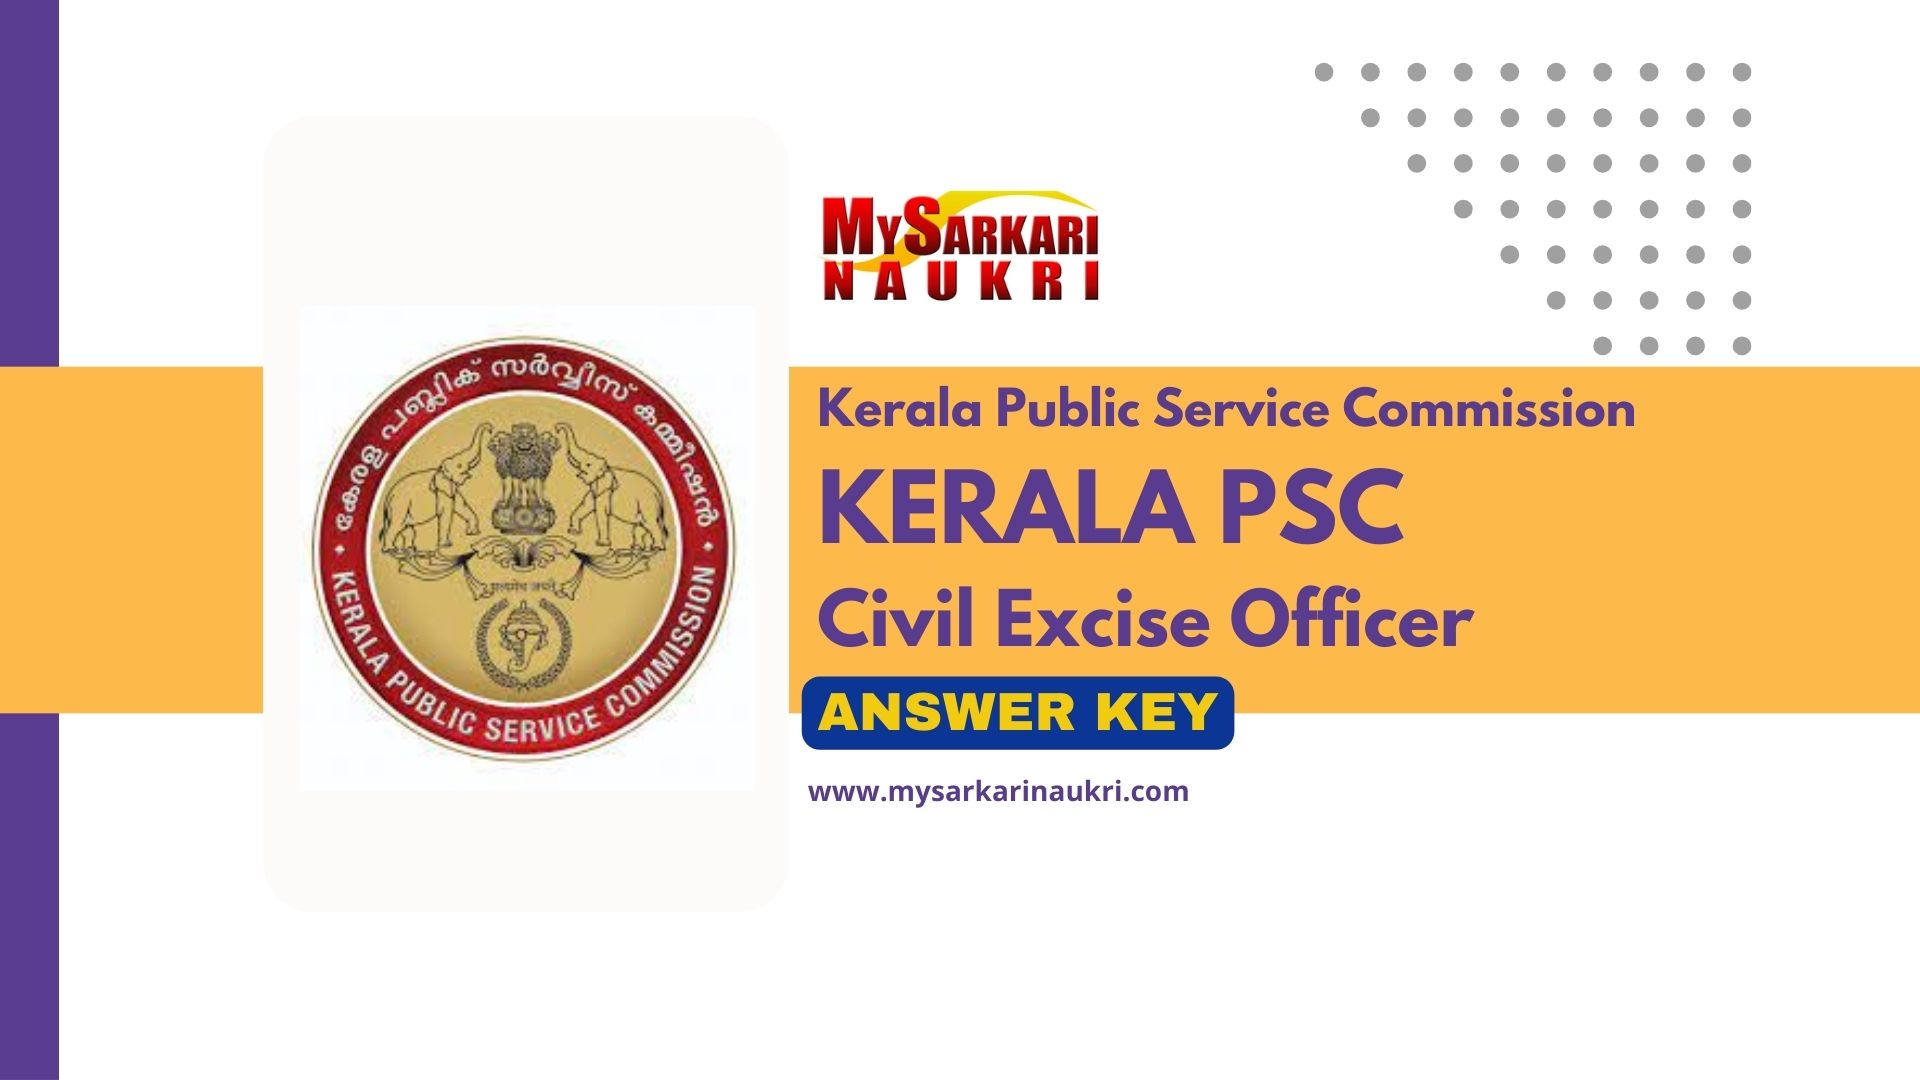 sujith e s - Civil Excise Officer - Kerala Excise department | LinkedIn